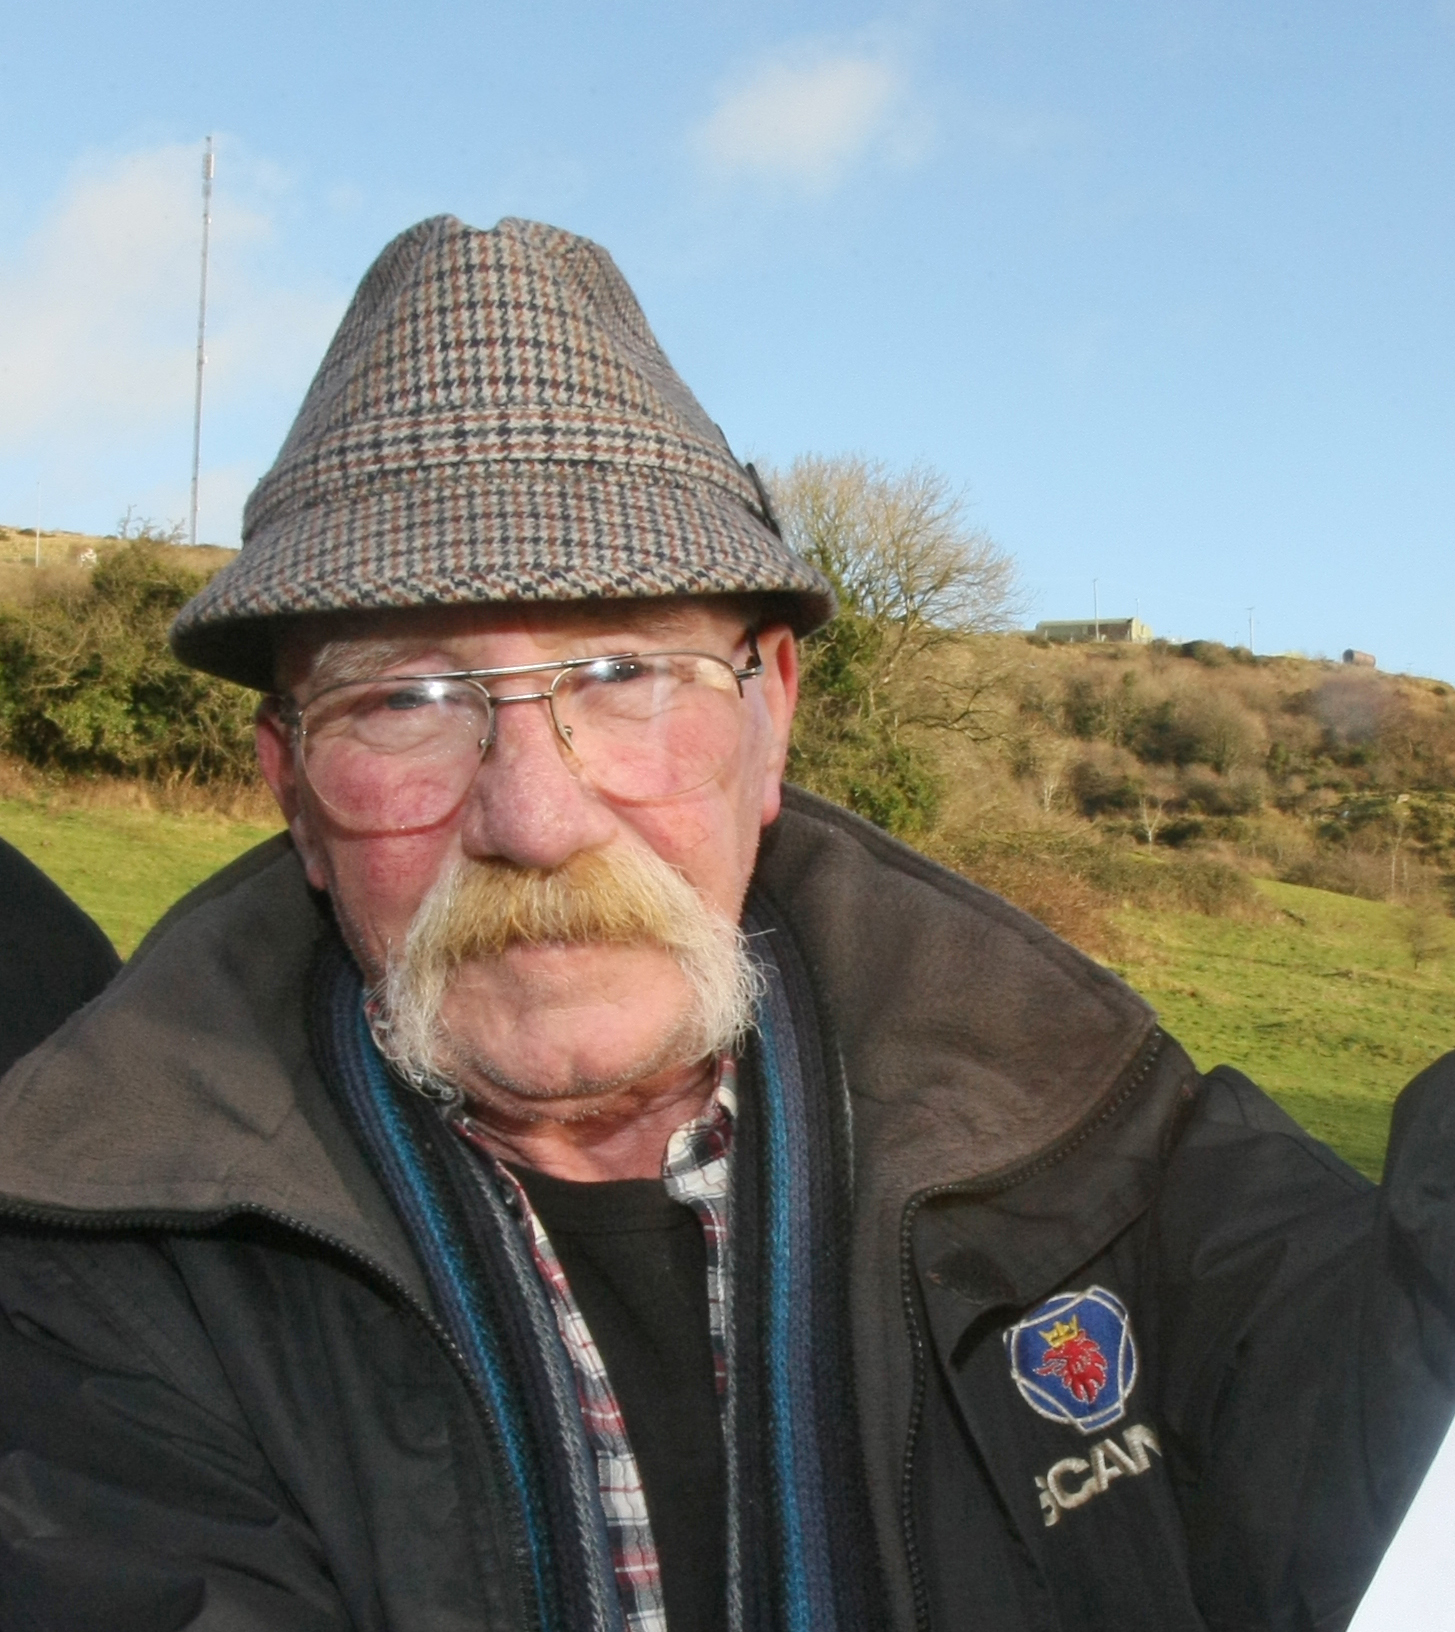 Seamus Conlon (70) was knocked down by a stolen car outside the City Cemetery 